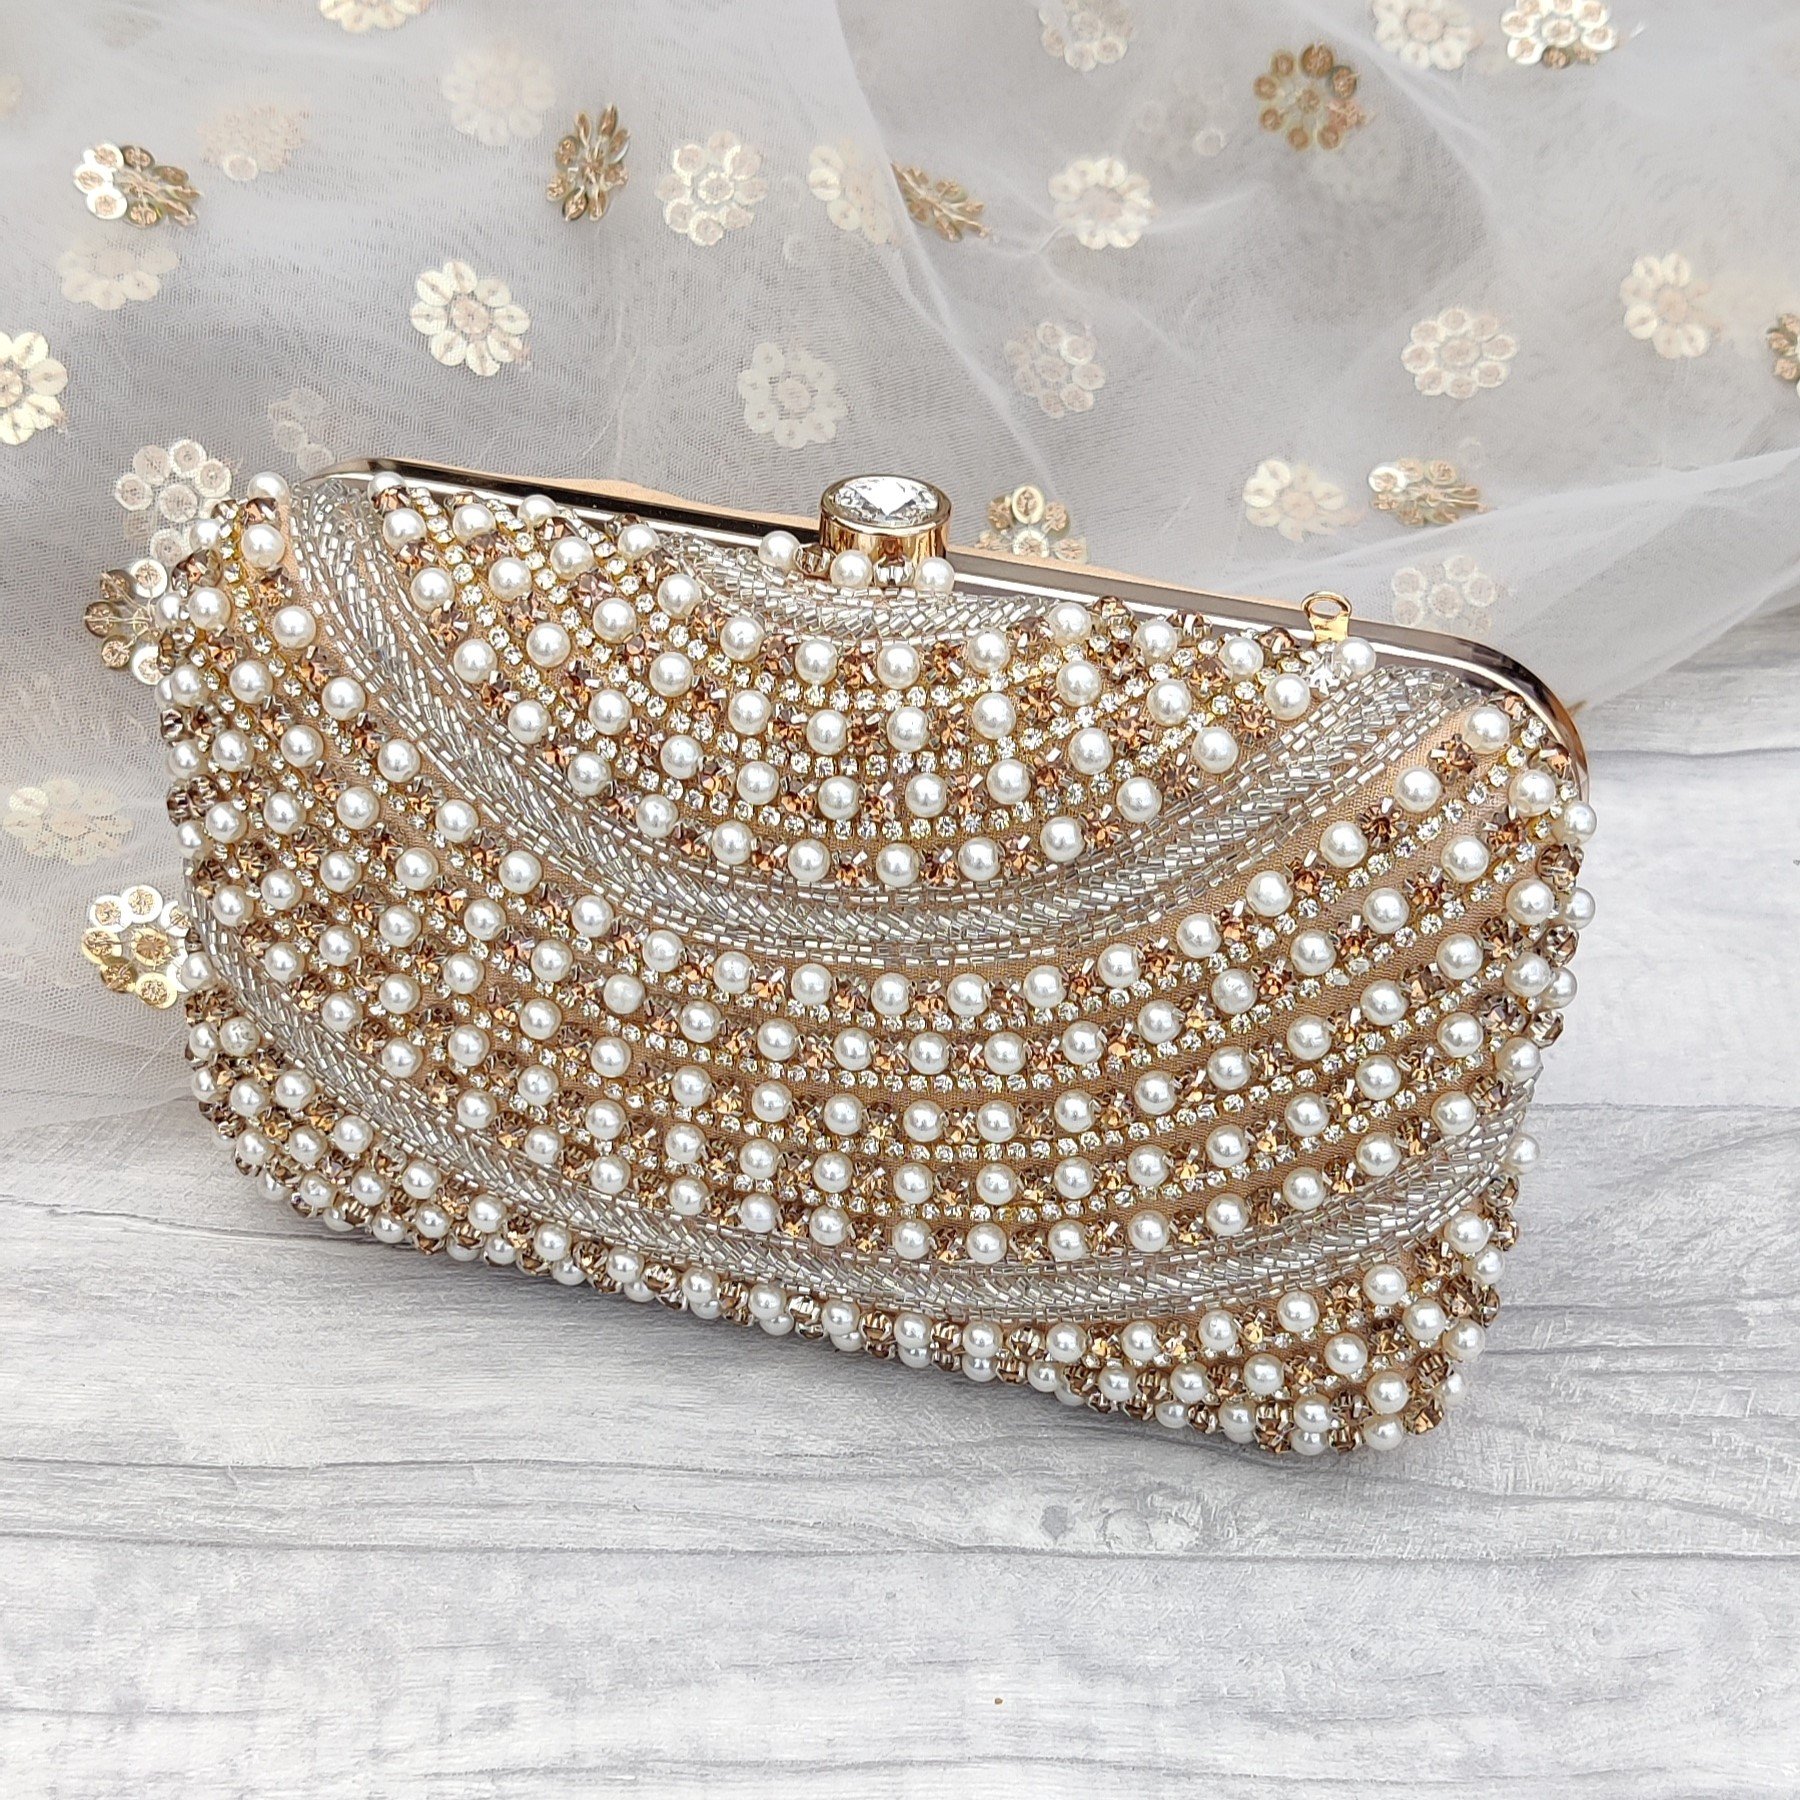 Antique Gold Pearl Indian Asian Pearl Stone Clutch Bag Purse Wedding ...